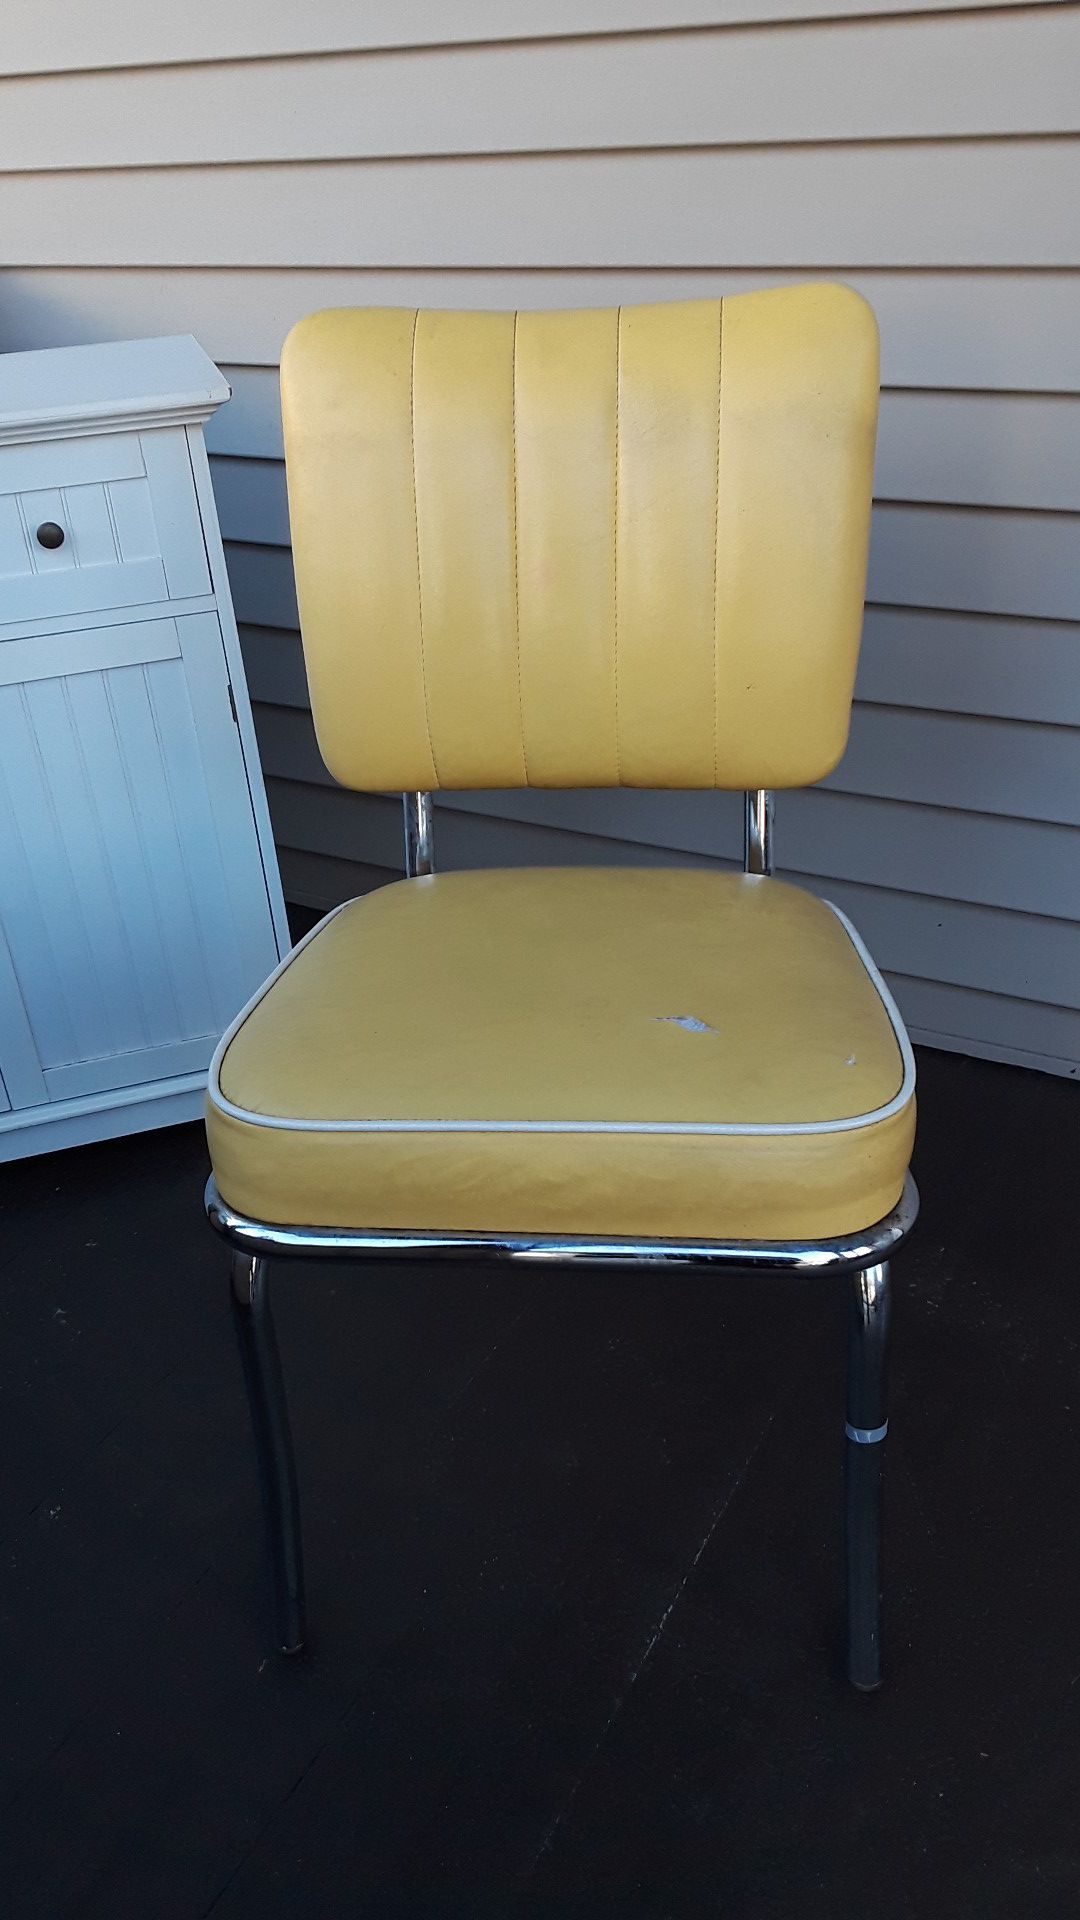 Antique 50's chair for the right buyer